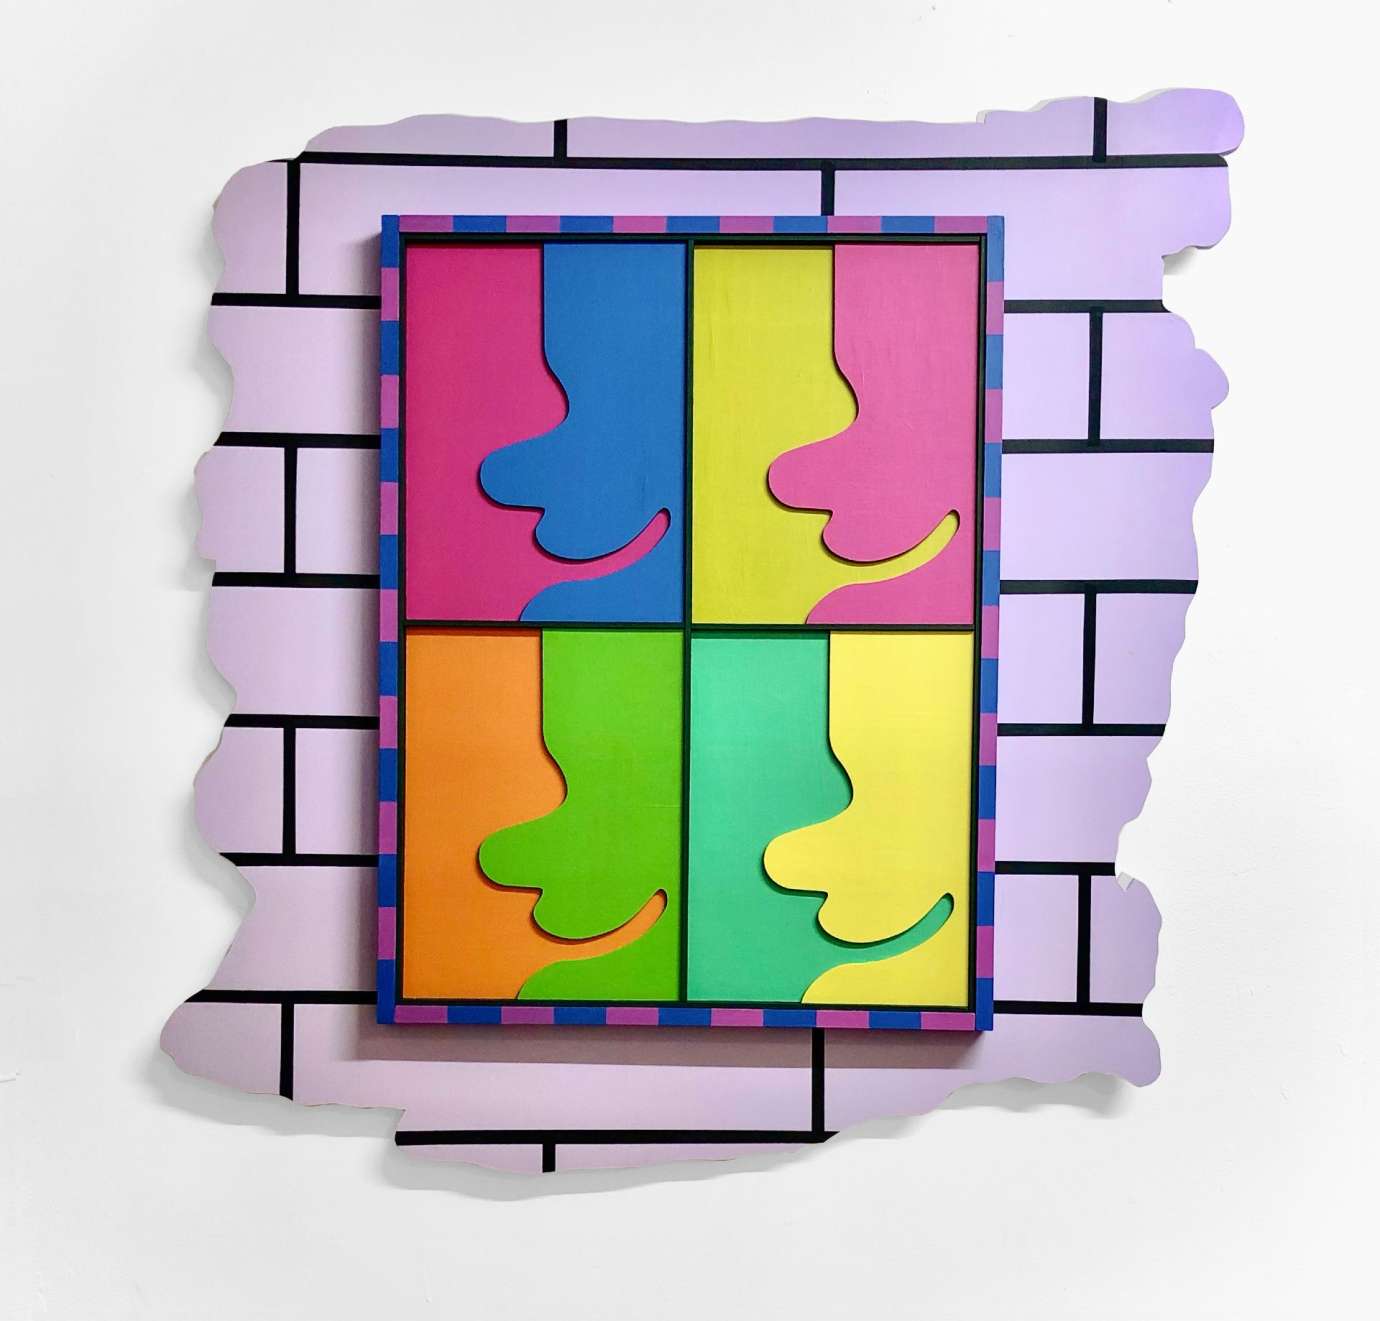 3D artwork of a grid of colorful portrait like shapes hanging on a purple brick wall by Jerstin Crosby